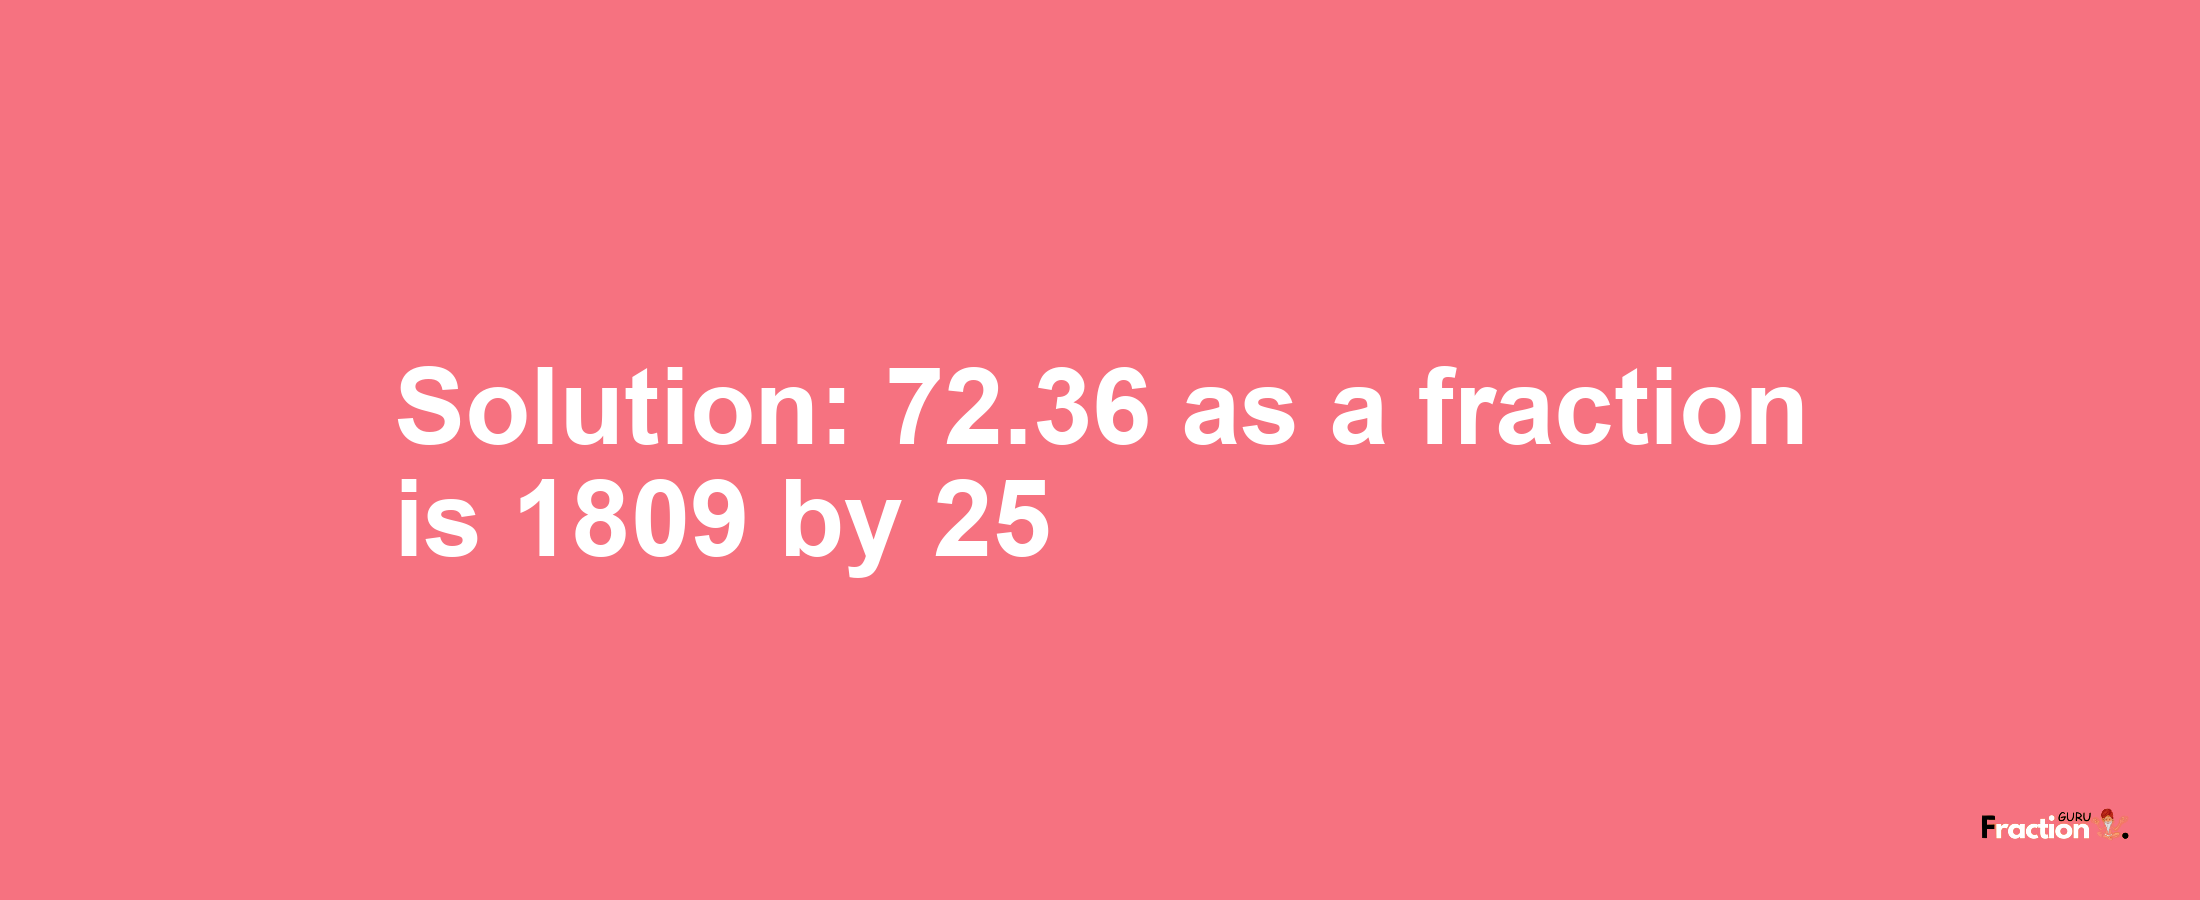 Solution:72.36 as a fraction is 1809/25